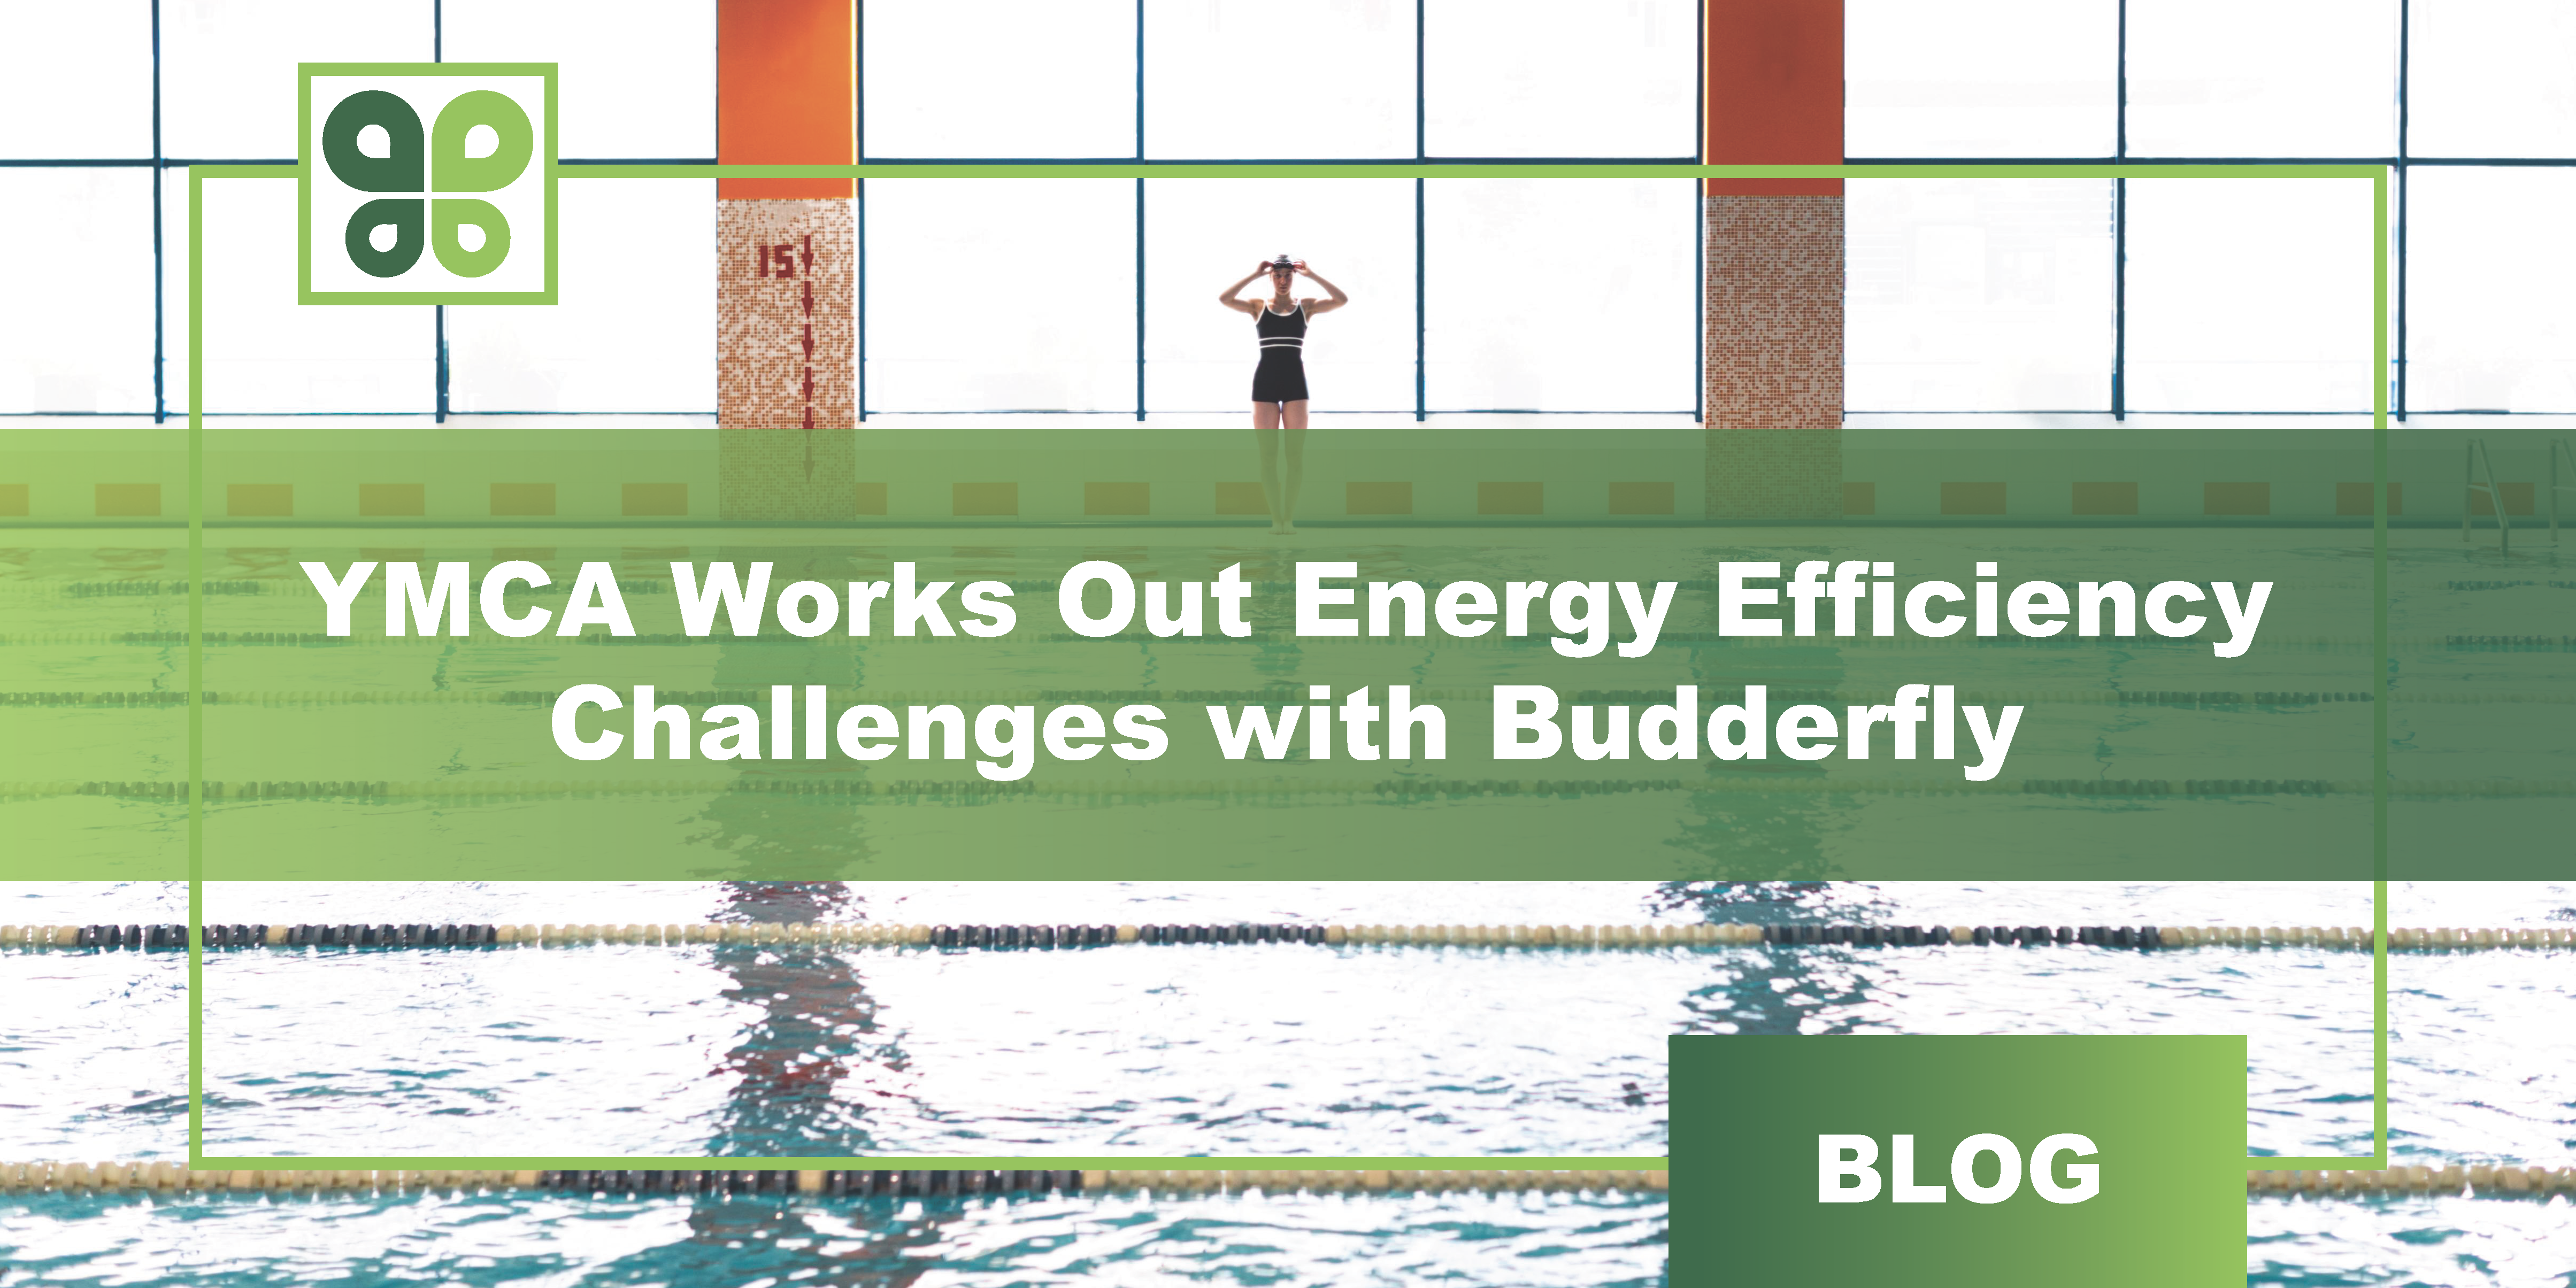 YMCA Works Out Energy Efficiency Challenges with Budderfly